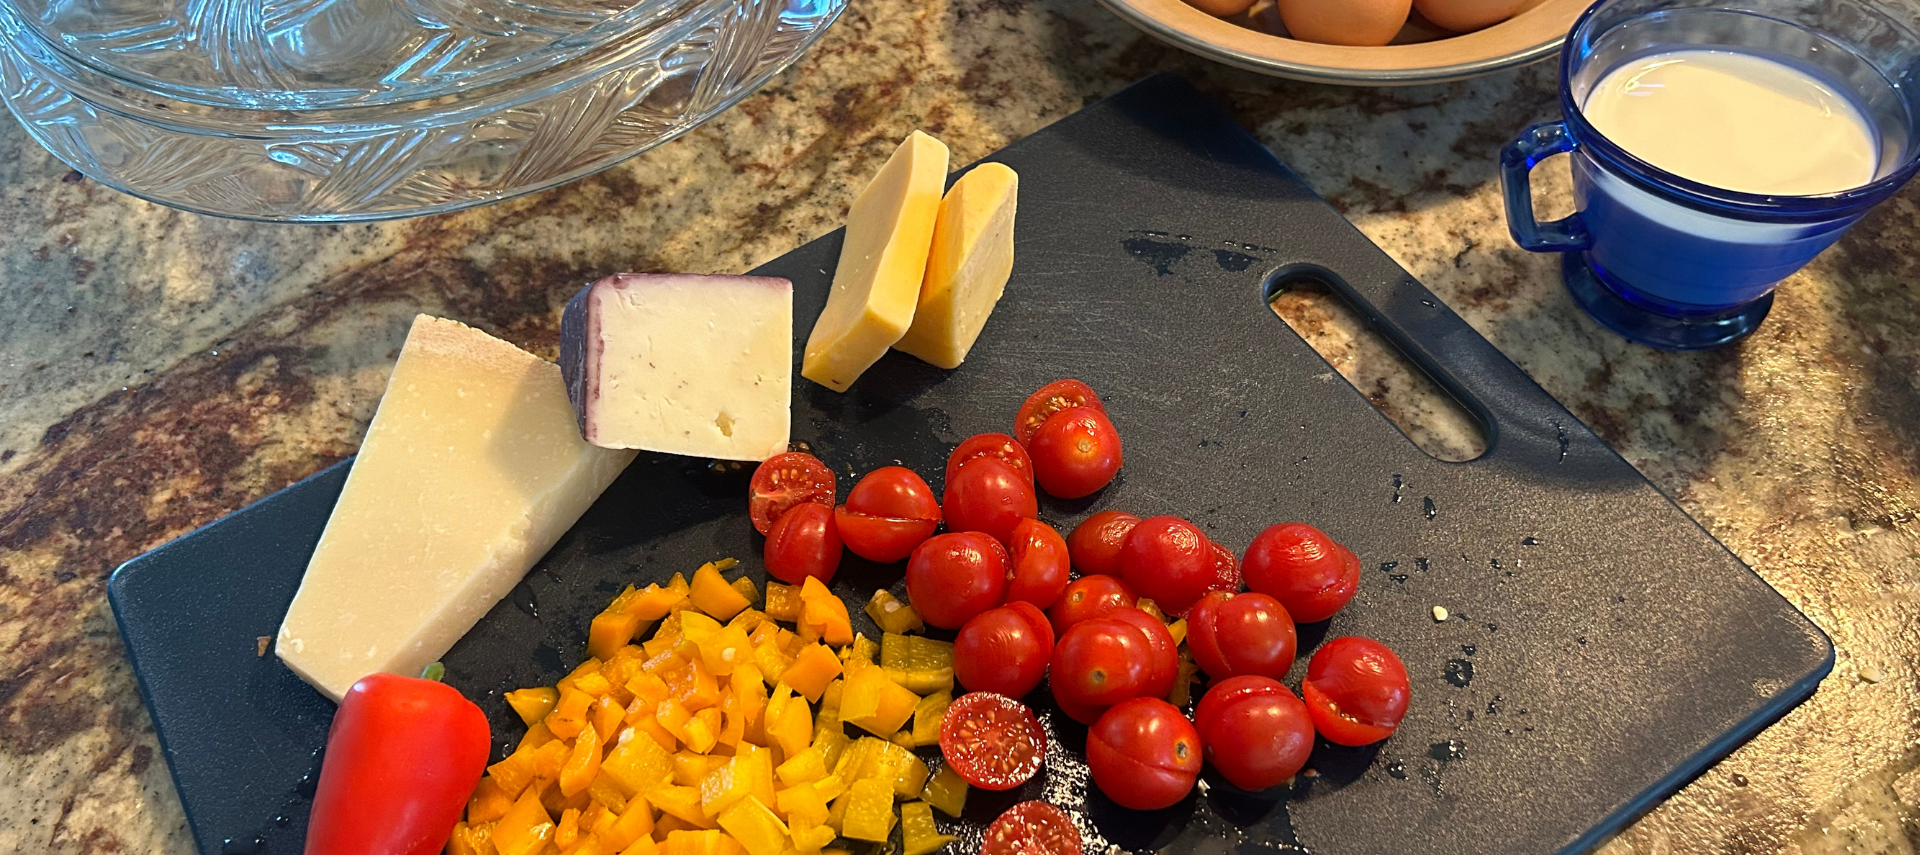 Image of tomatoes pepper and cheese as omelet ingredients on cutting board